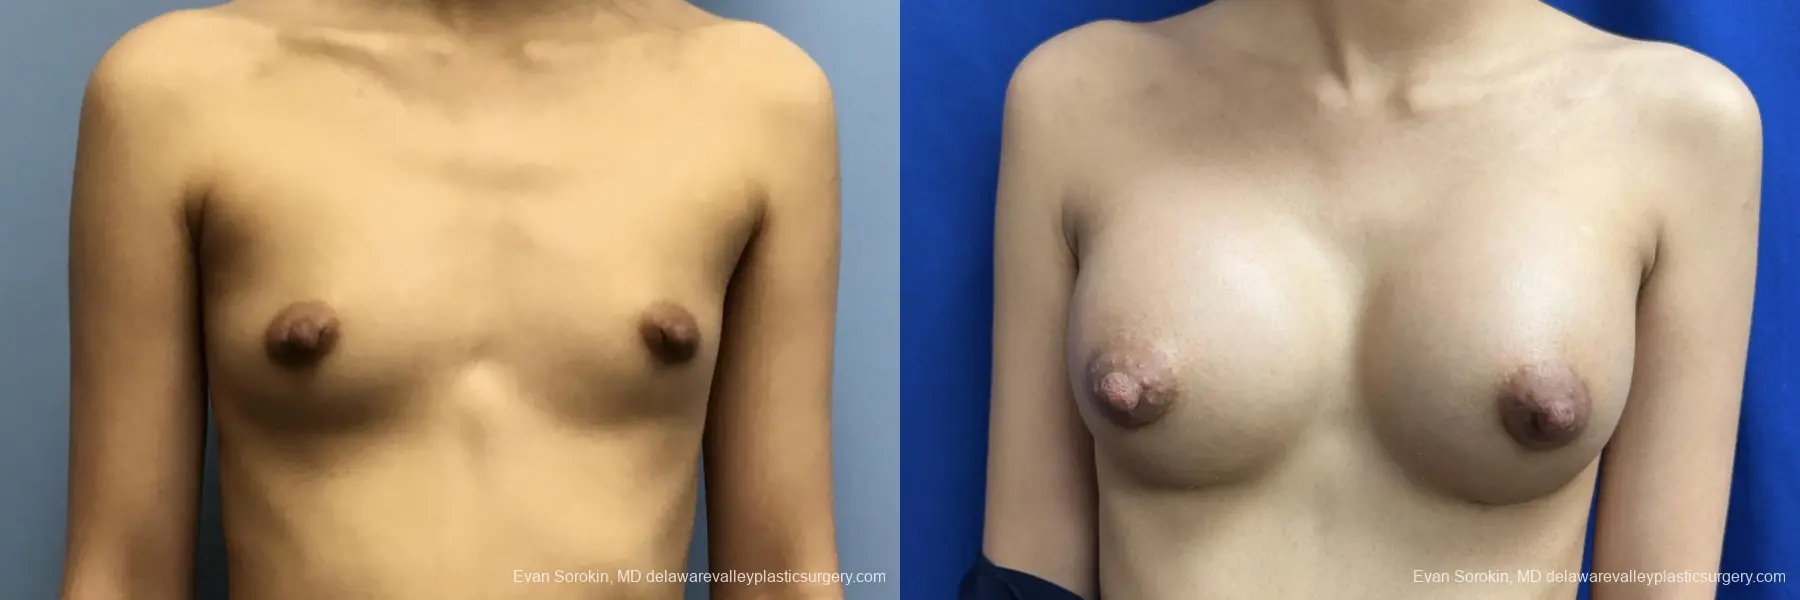 Breast Augmentation: Patient 211 - Before and After 1